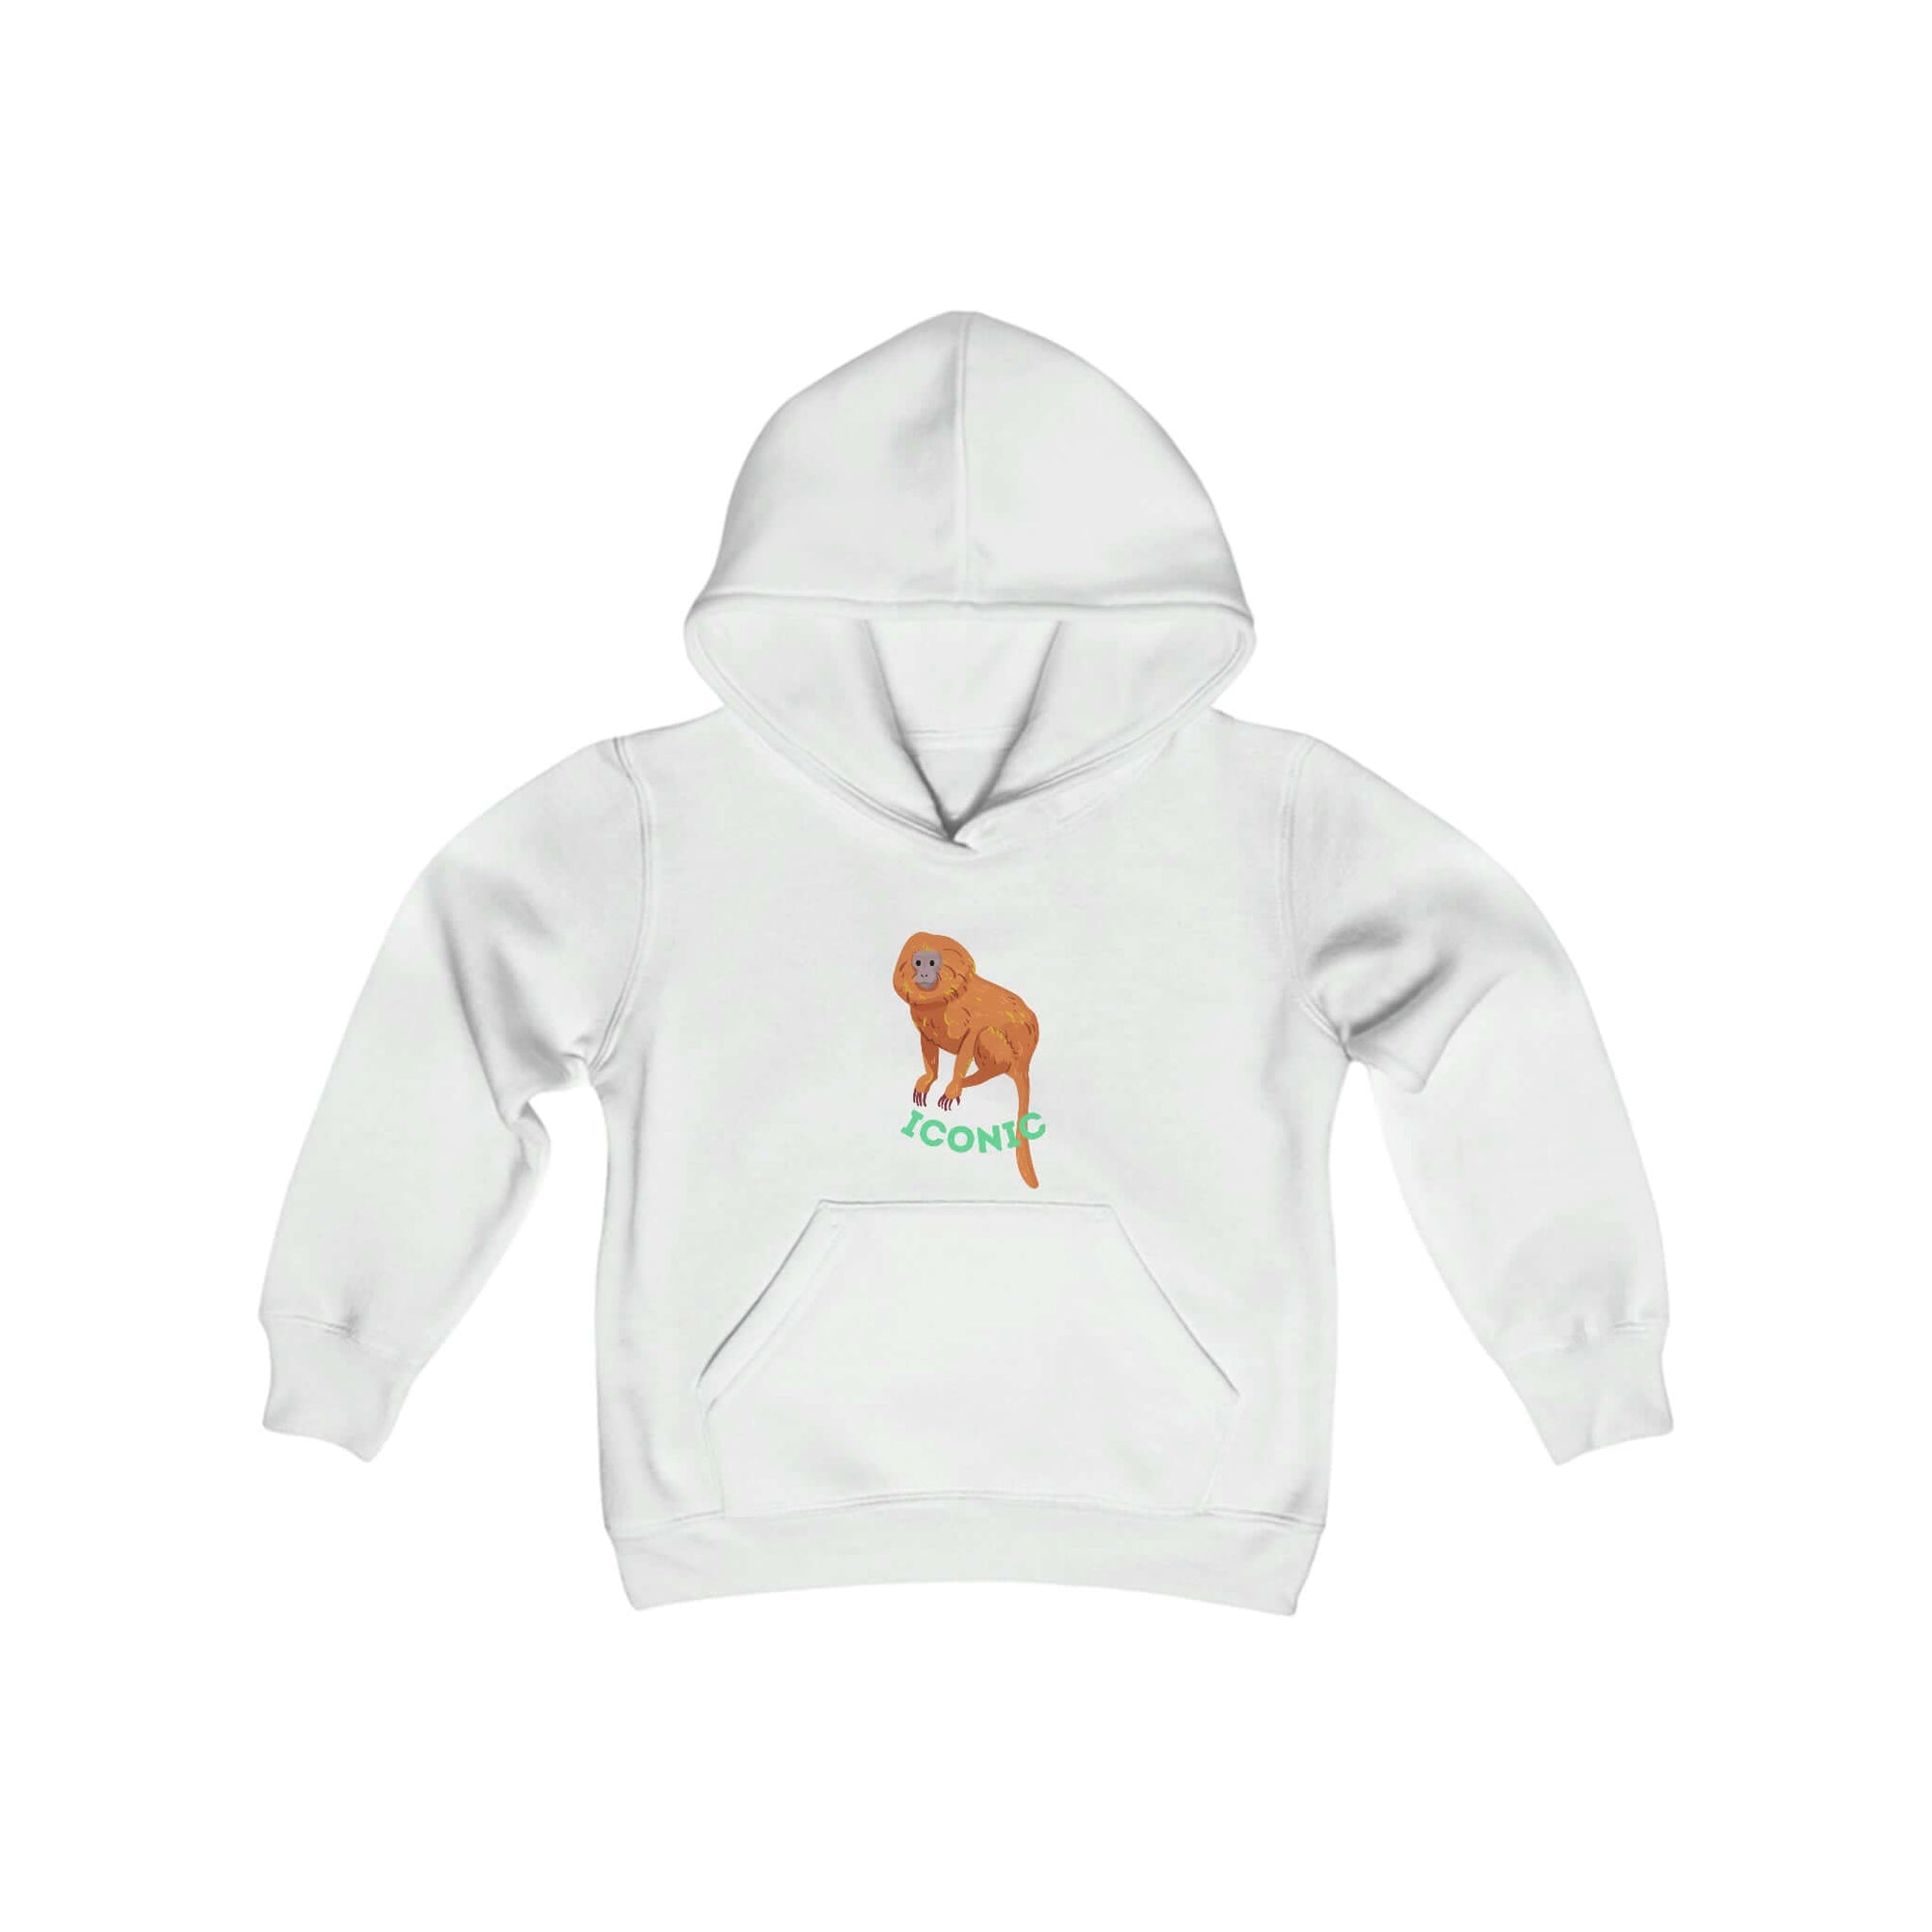 Youth Heavy Blend Hooded Sweatshirt - Iconic Golden Lion Tamarin - Primation